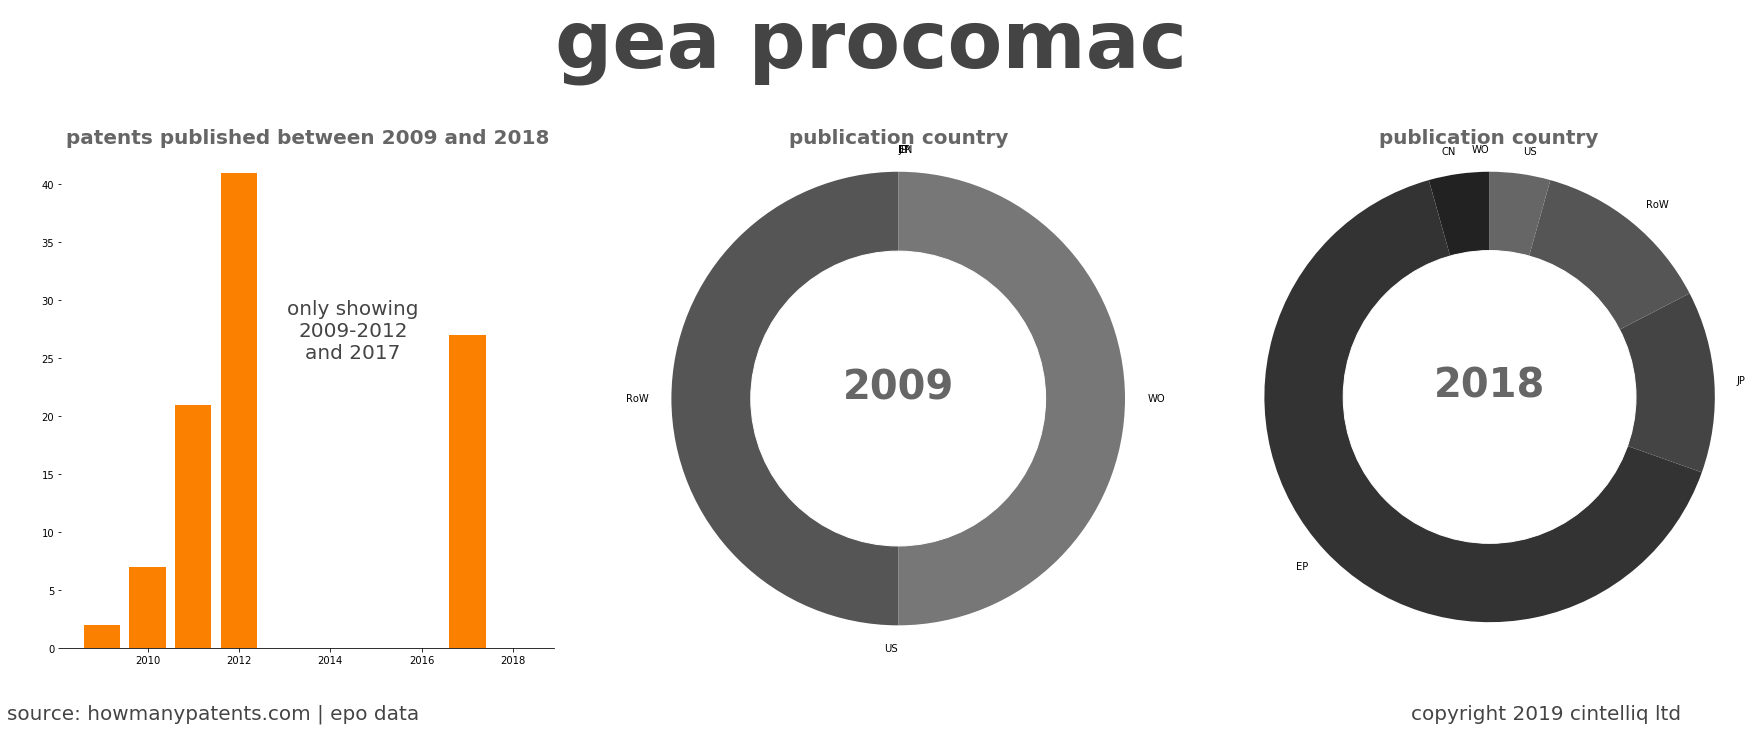 summary of patents for Gea Procomac